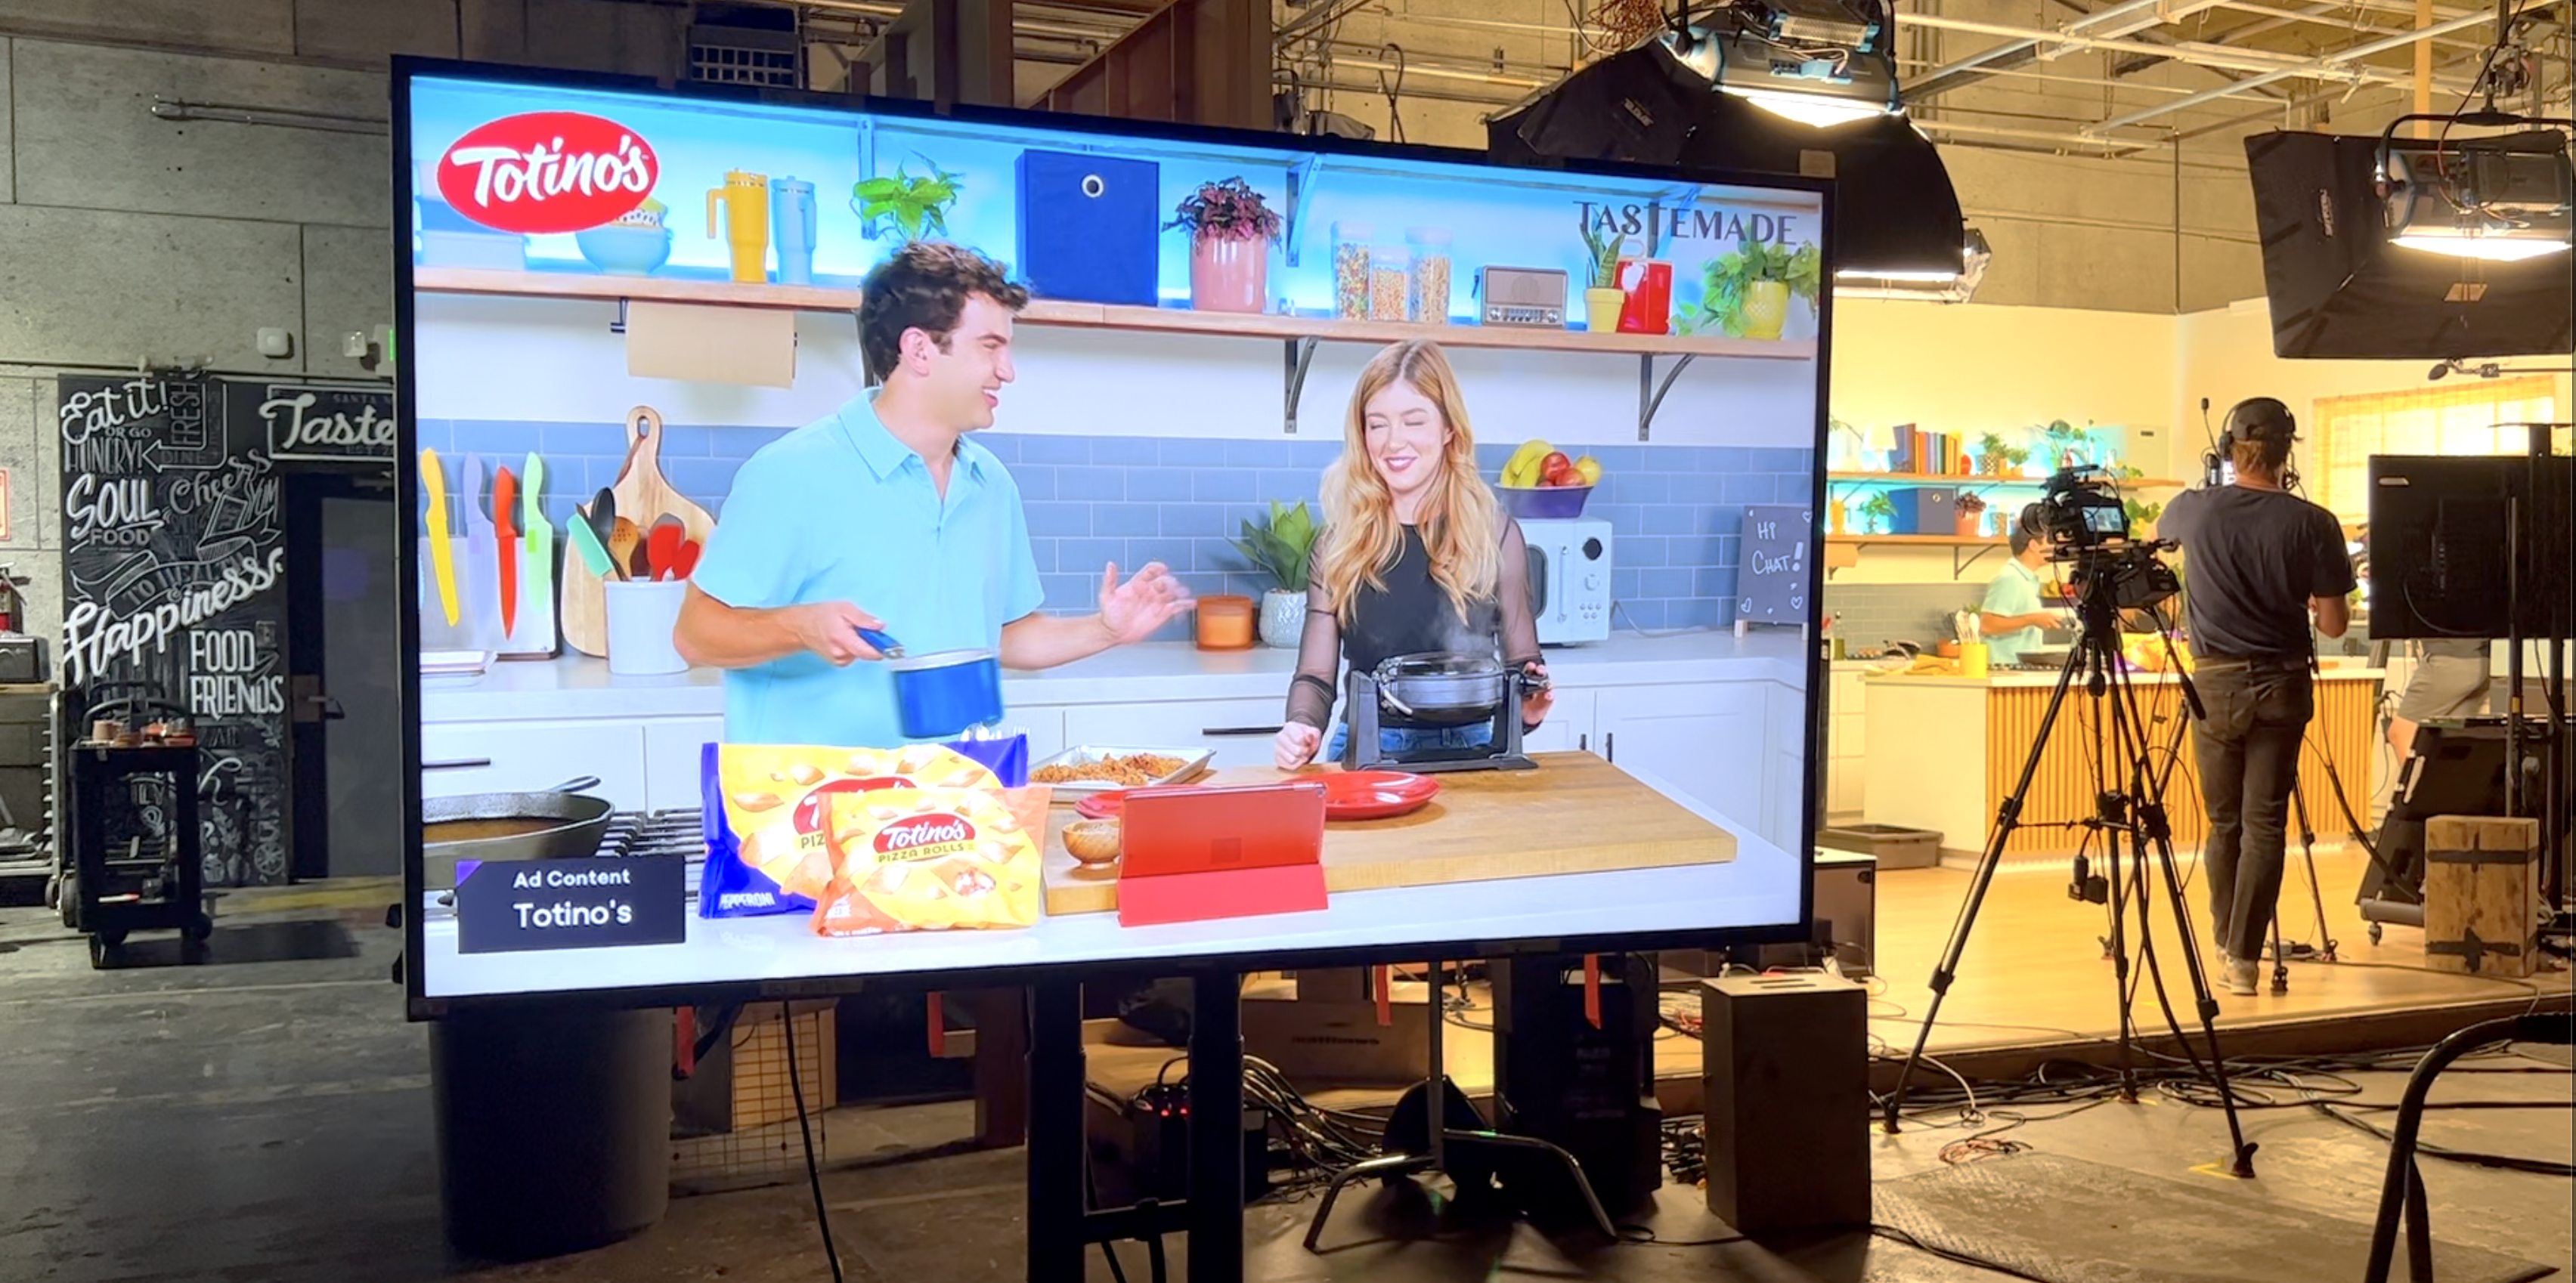 Tastemade’s Epic Twitch Cooking Show with Chef Matthew Merril: A Flavorful Triumph